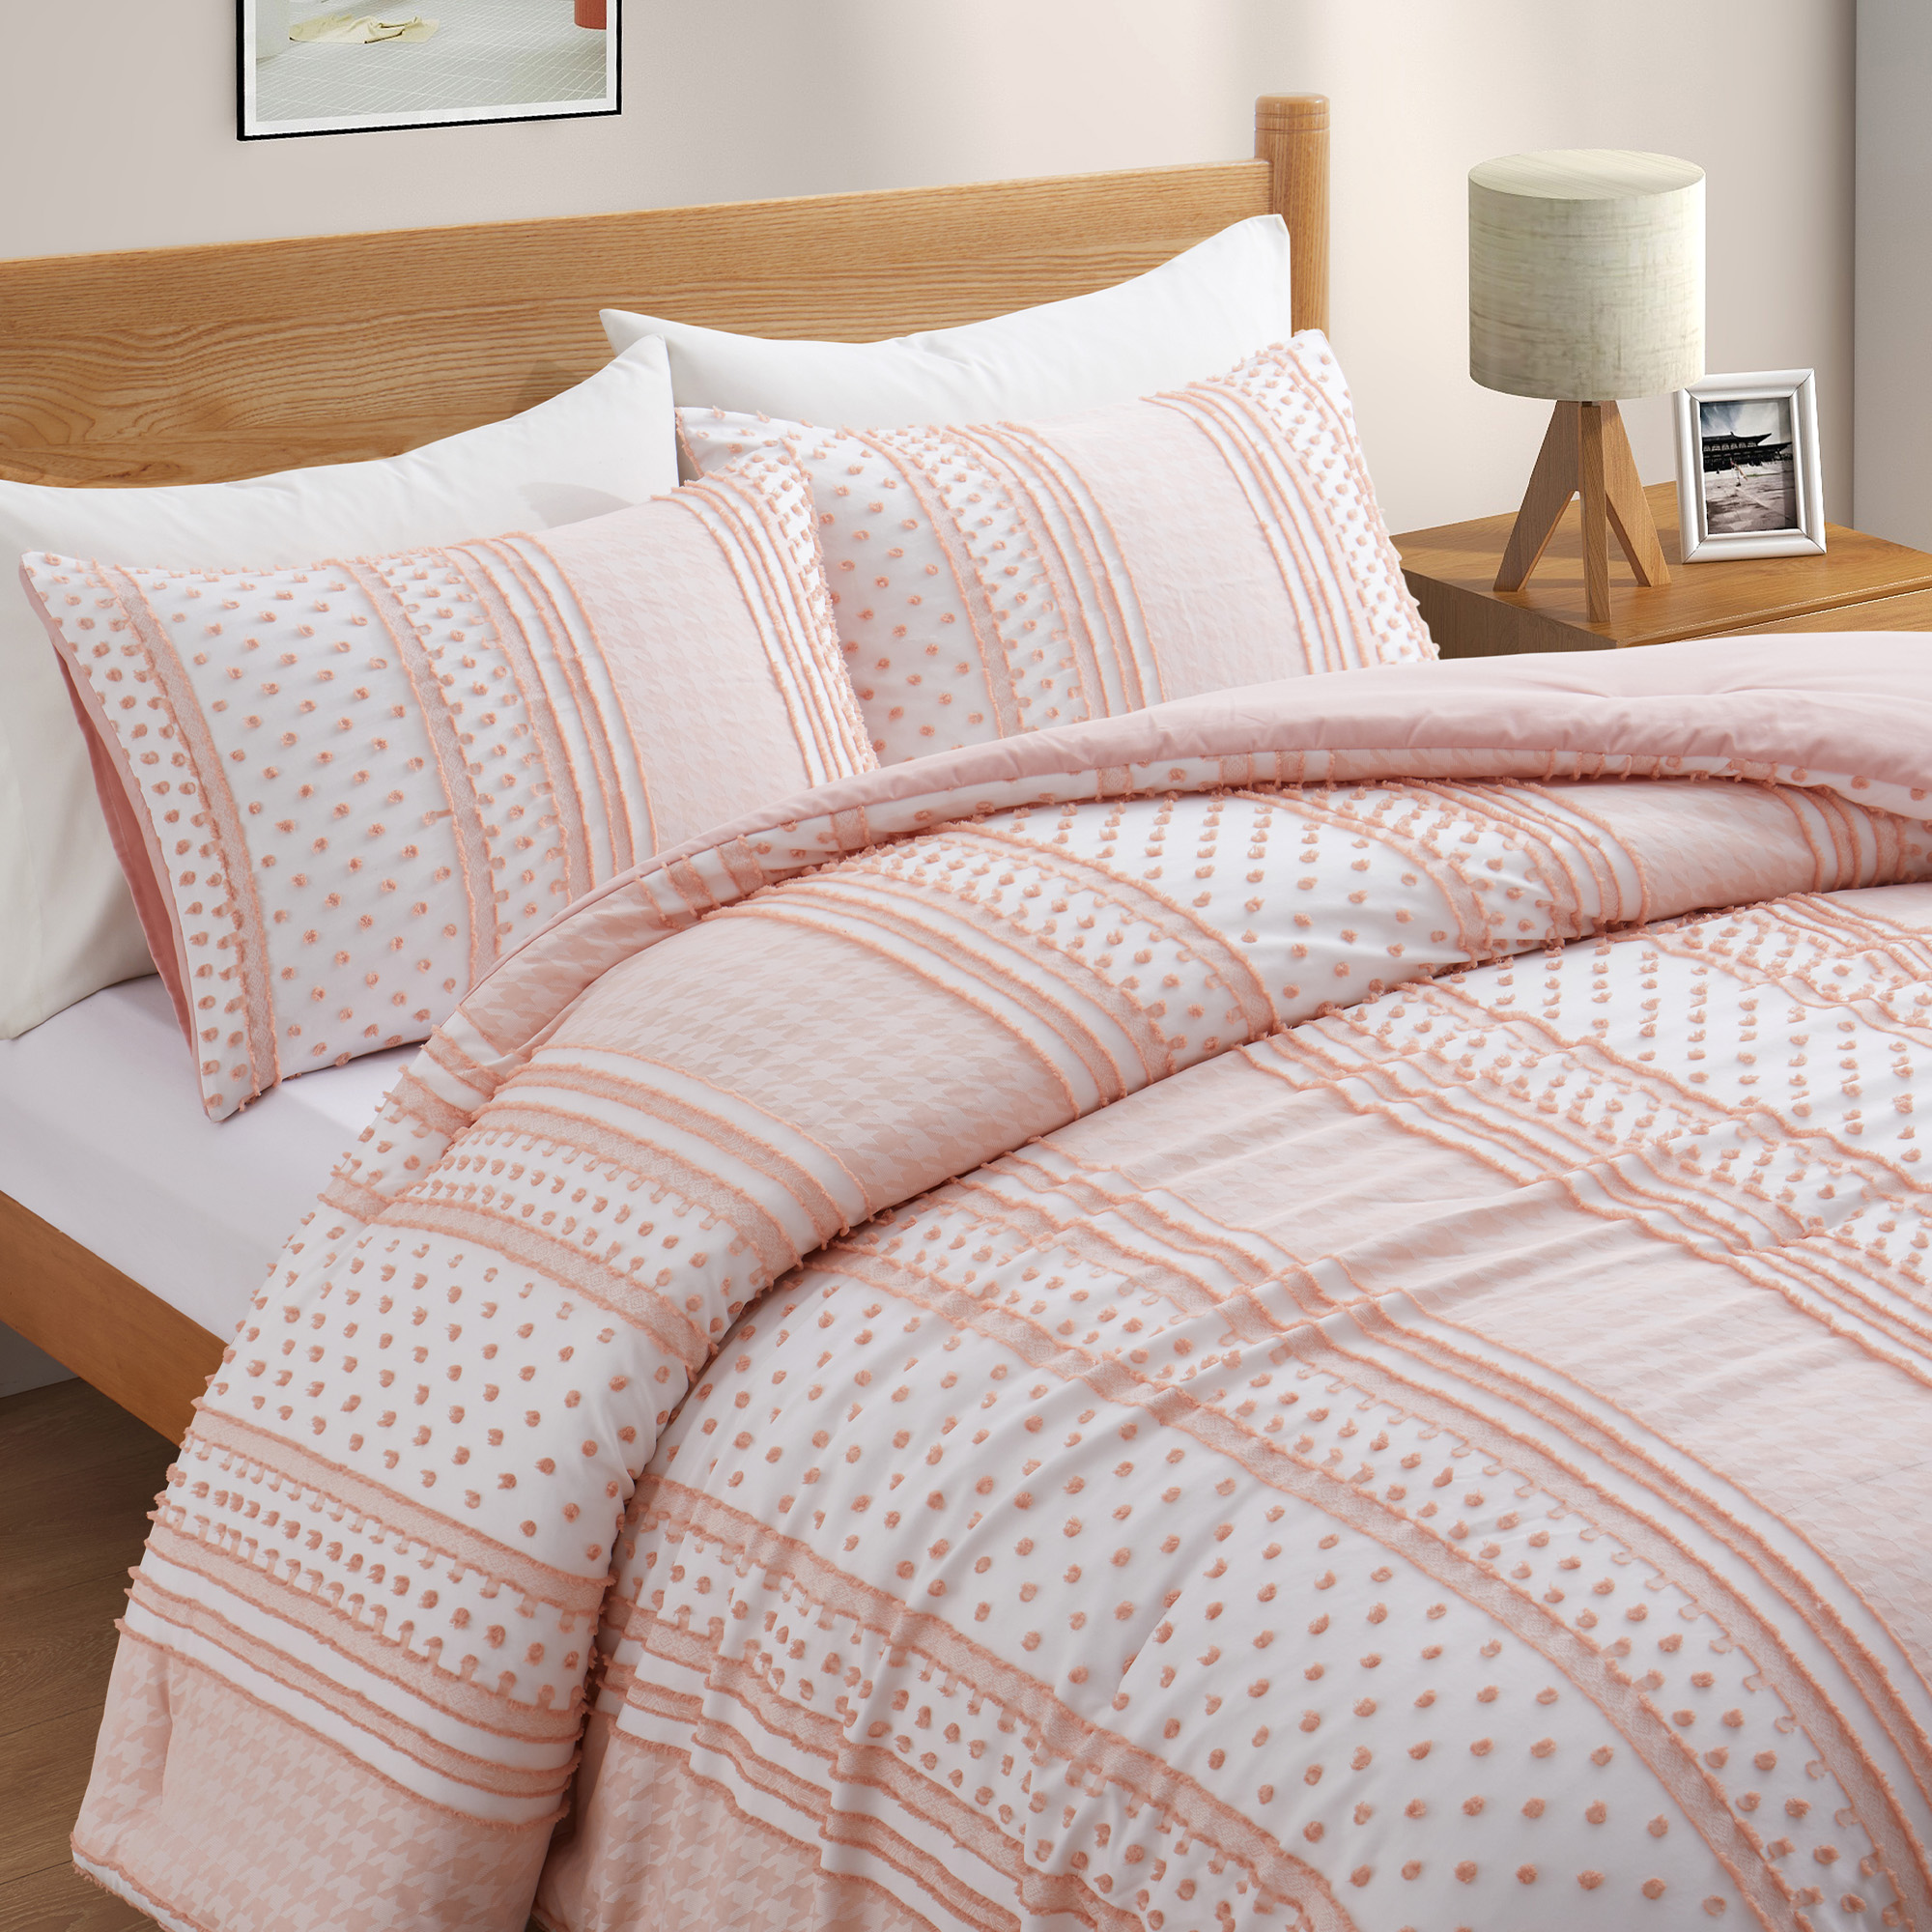 Peace Nest All Season Warmth Clipped Microfiber Comforter Set, Pink, King - image 2 of 6